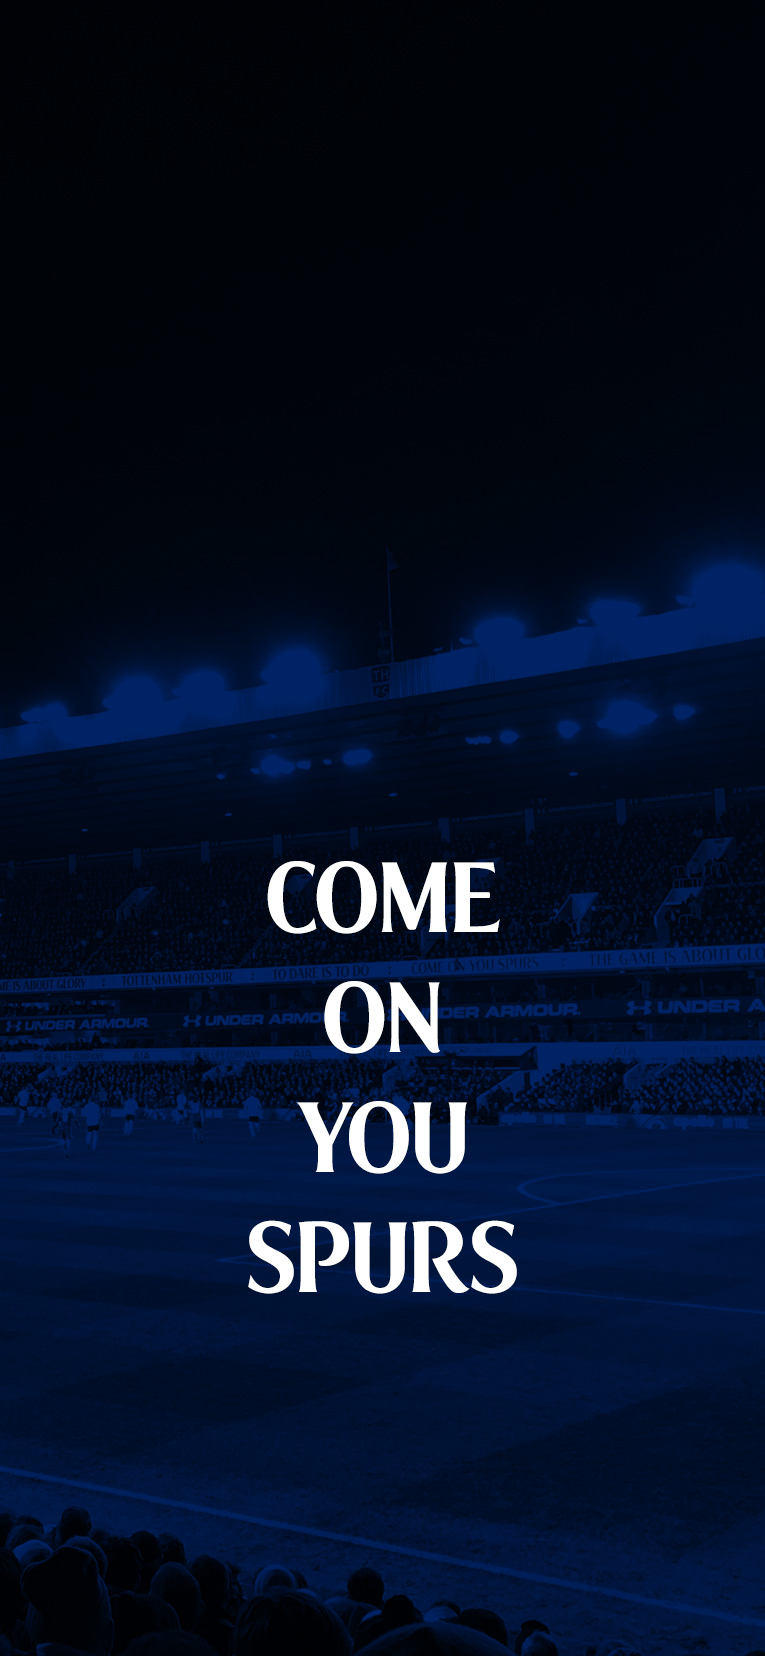 E On You Spurs Wallpaper For iPhone X By Mevlutats